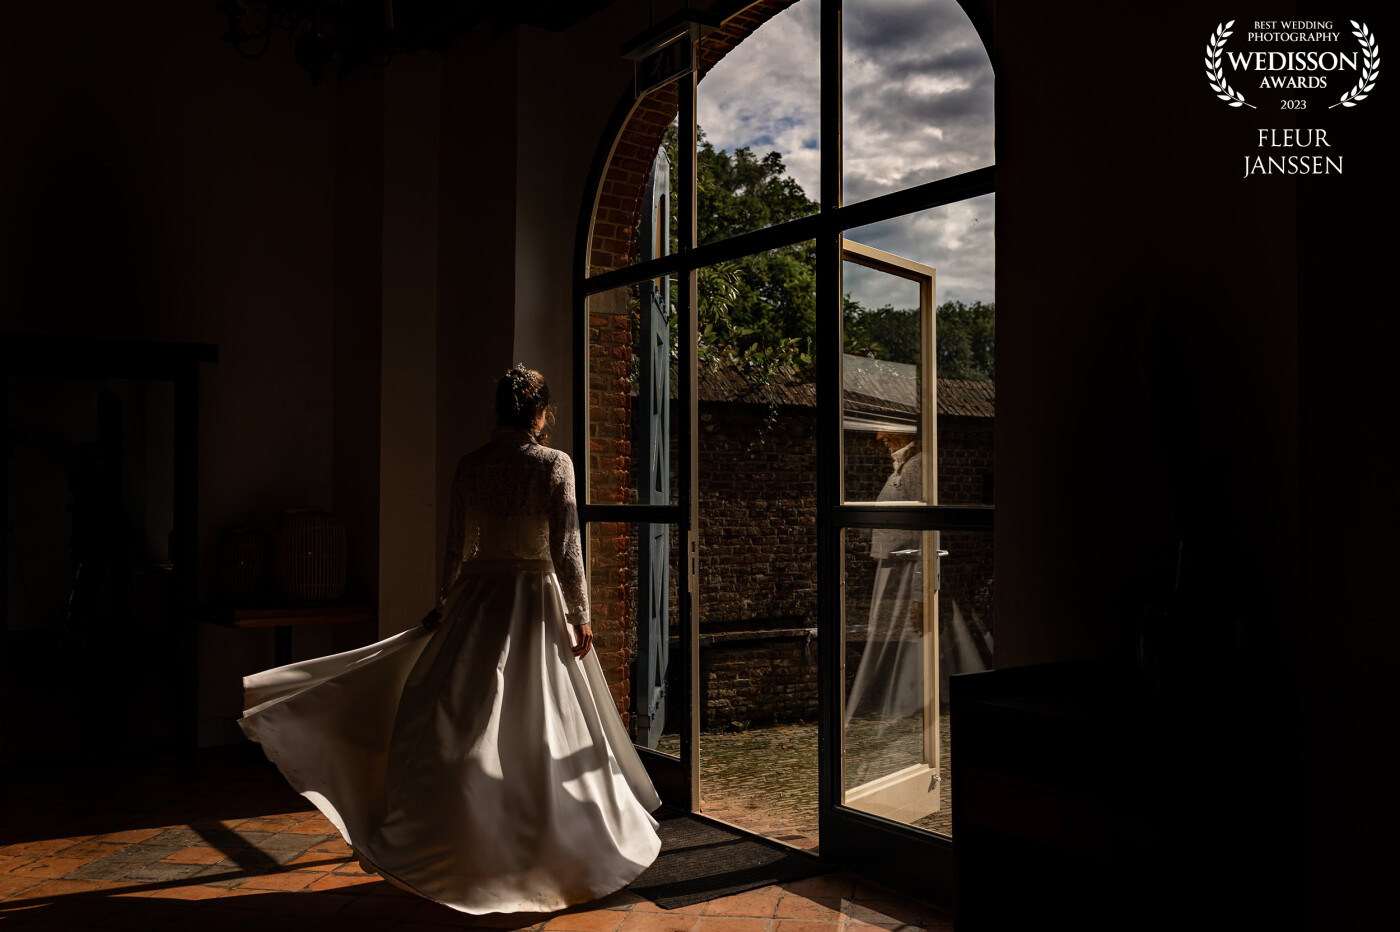 The light was perfect, the bride was perfect, just a lucky shot.